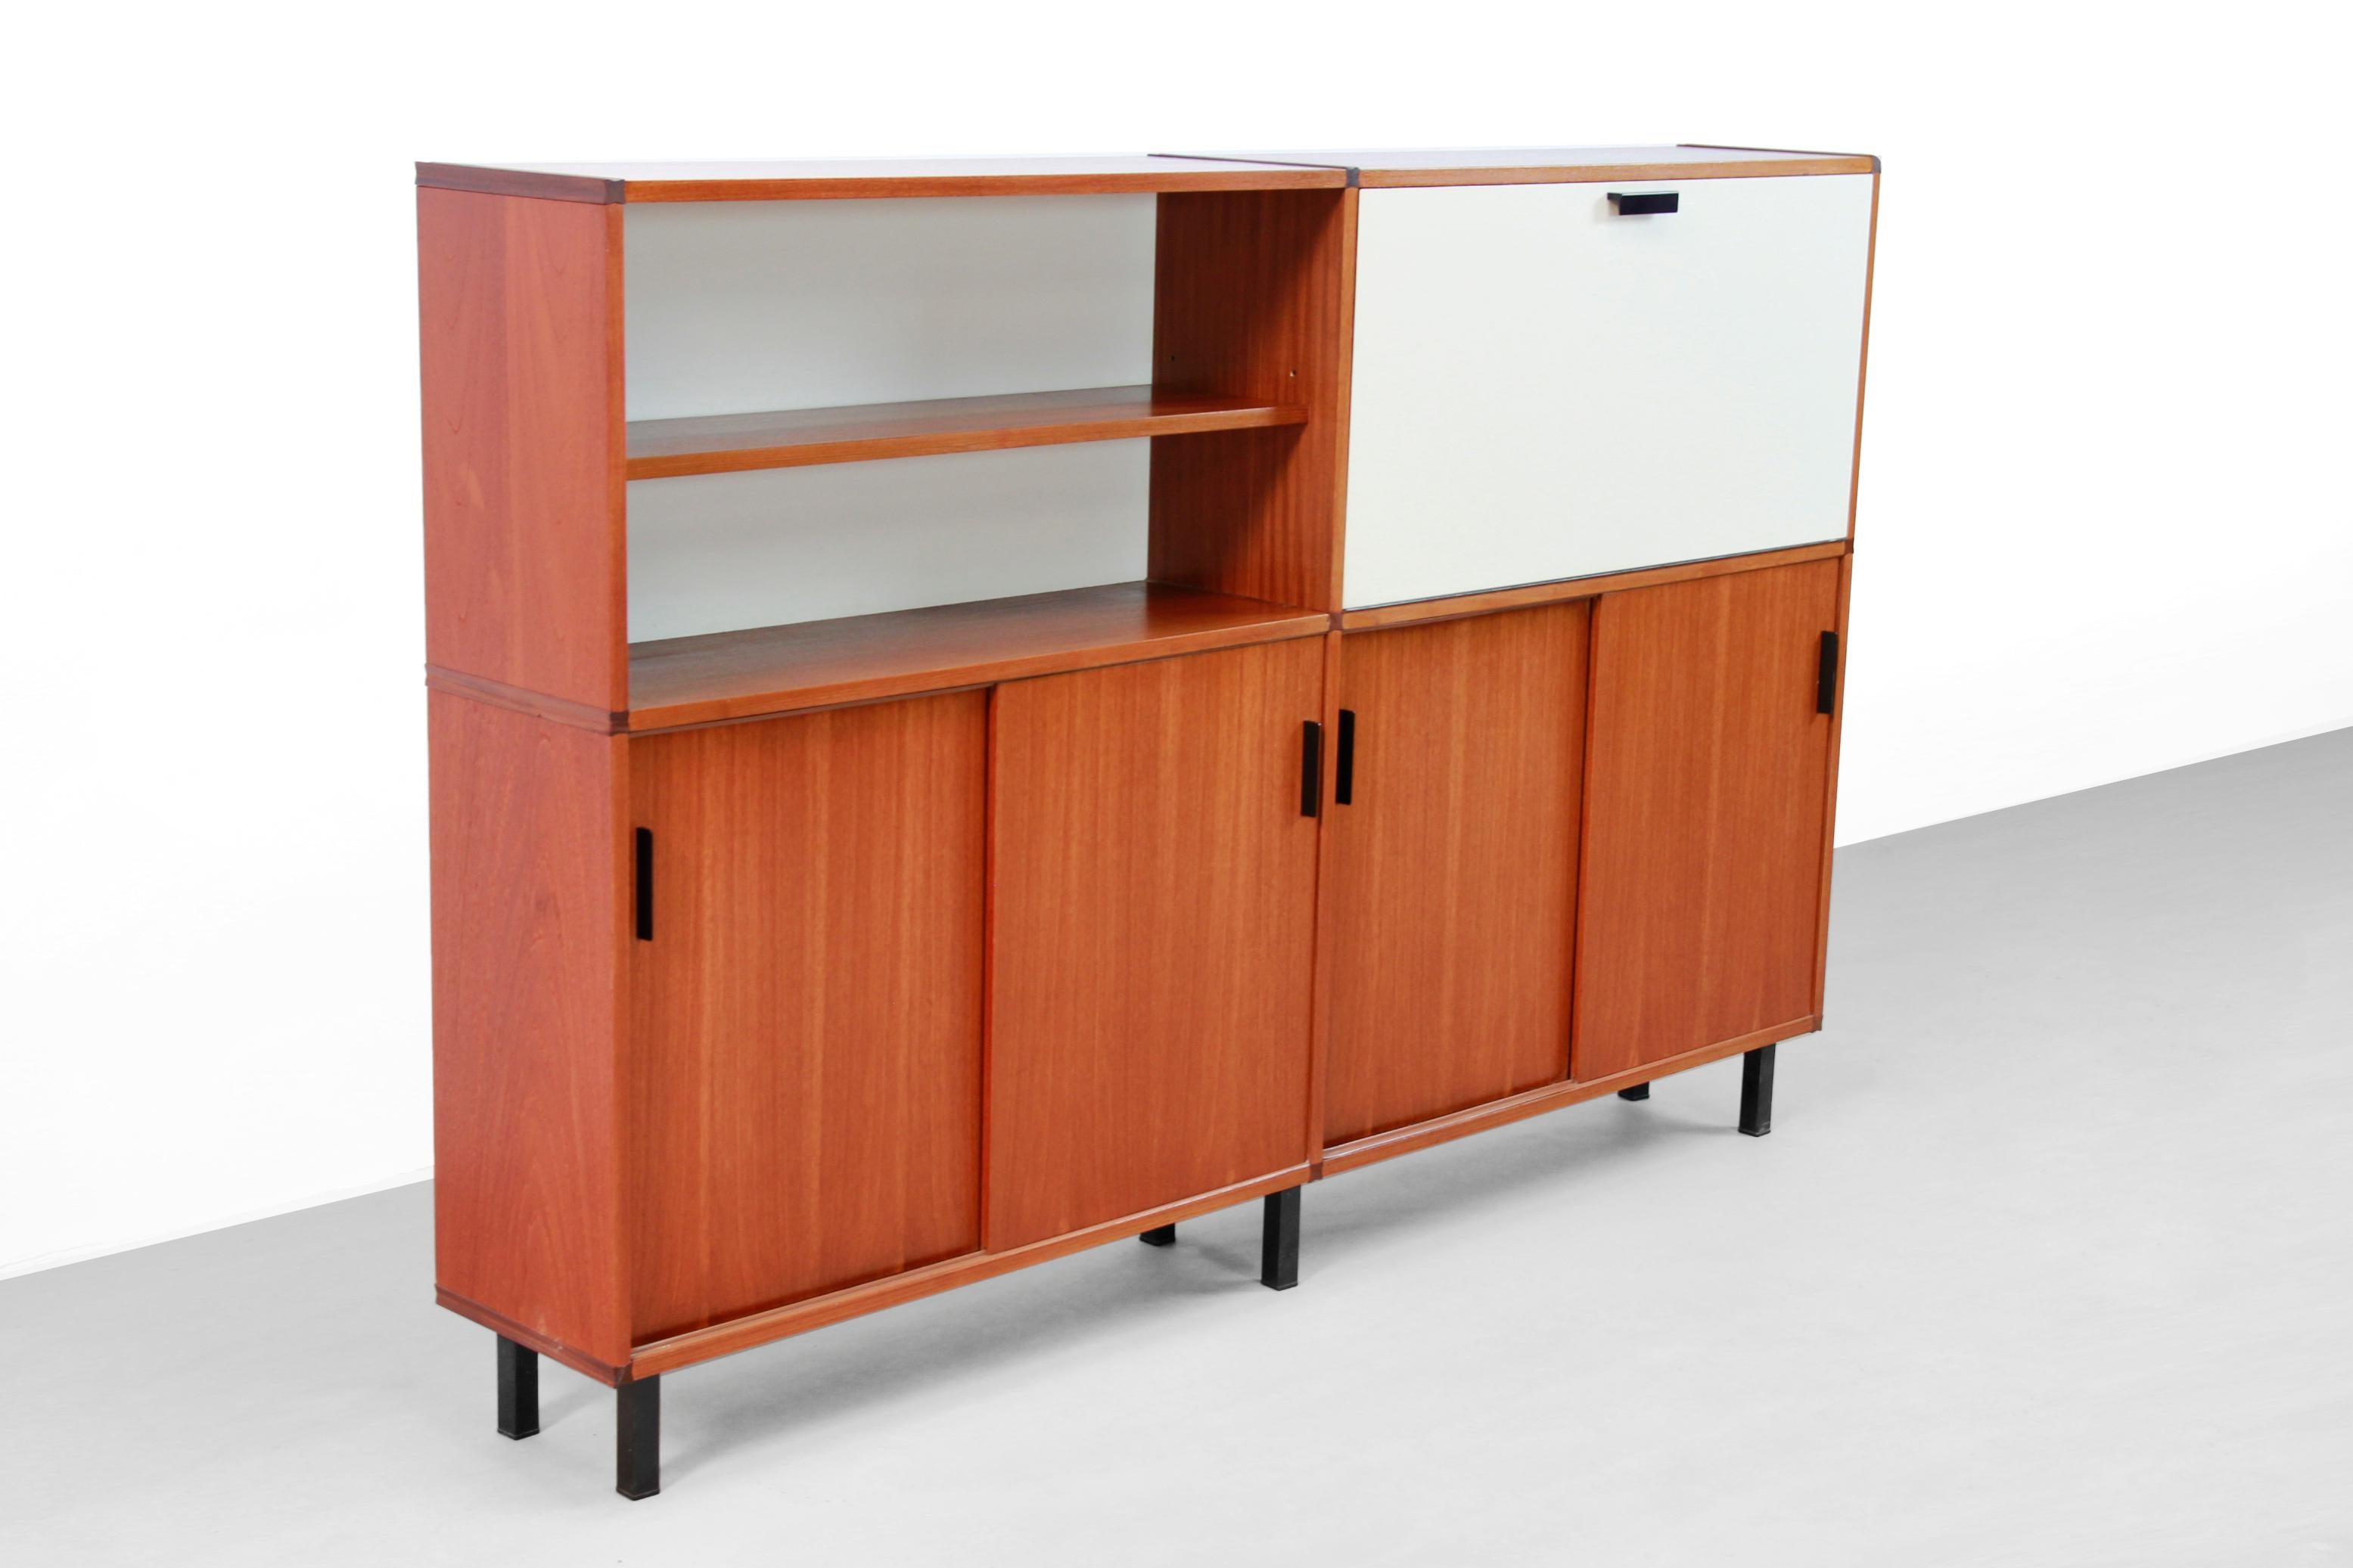 Dutch Pastoe Made to Measure Cabinet by Cees Braakman, Netherlands, 1960s